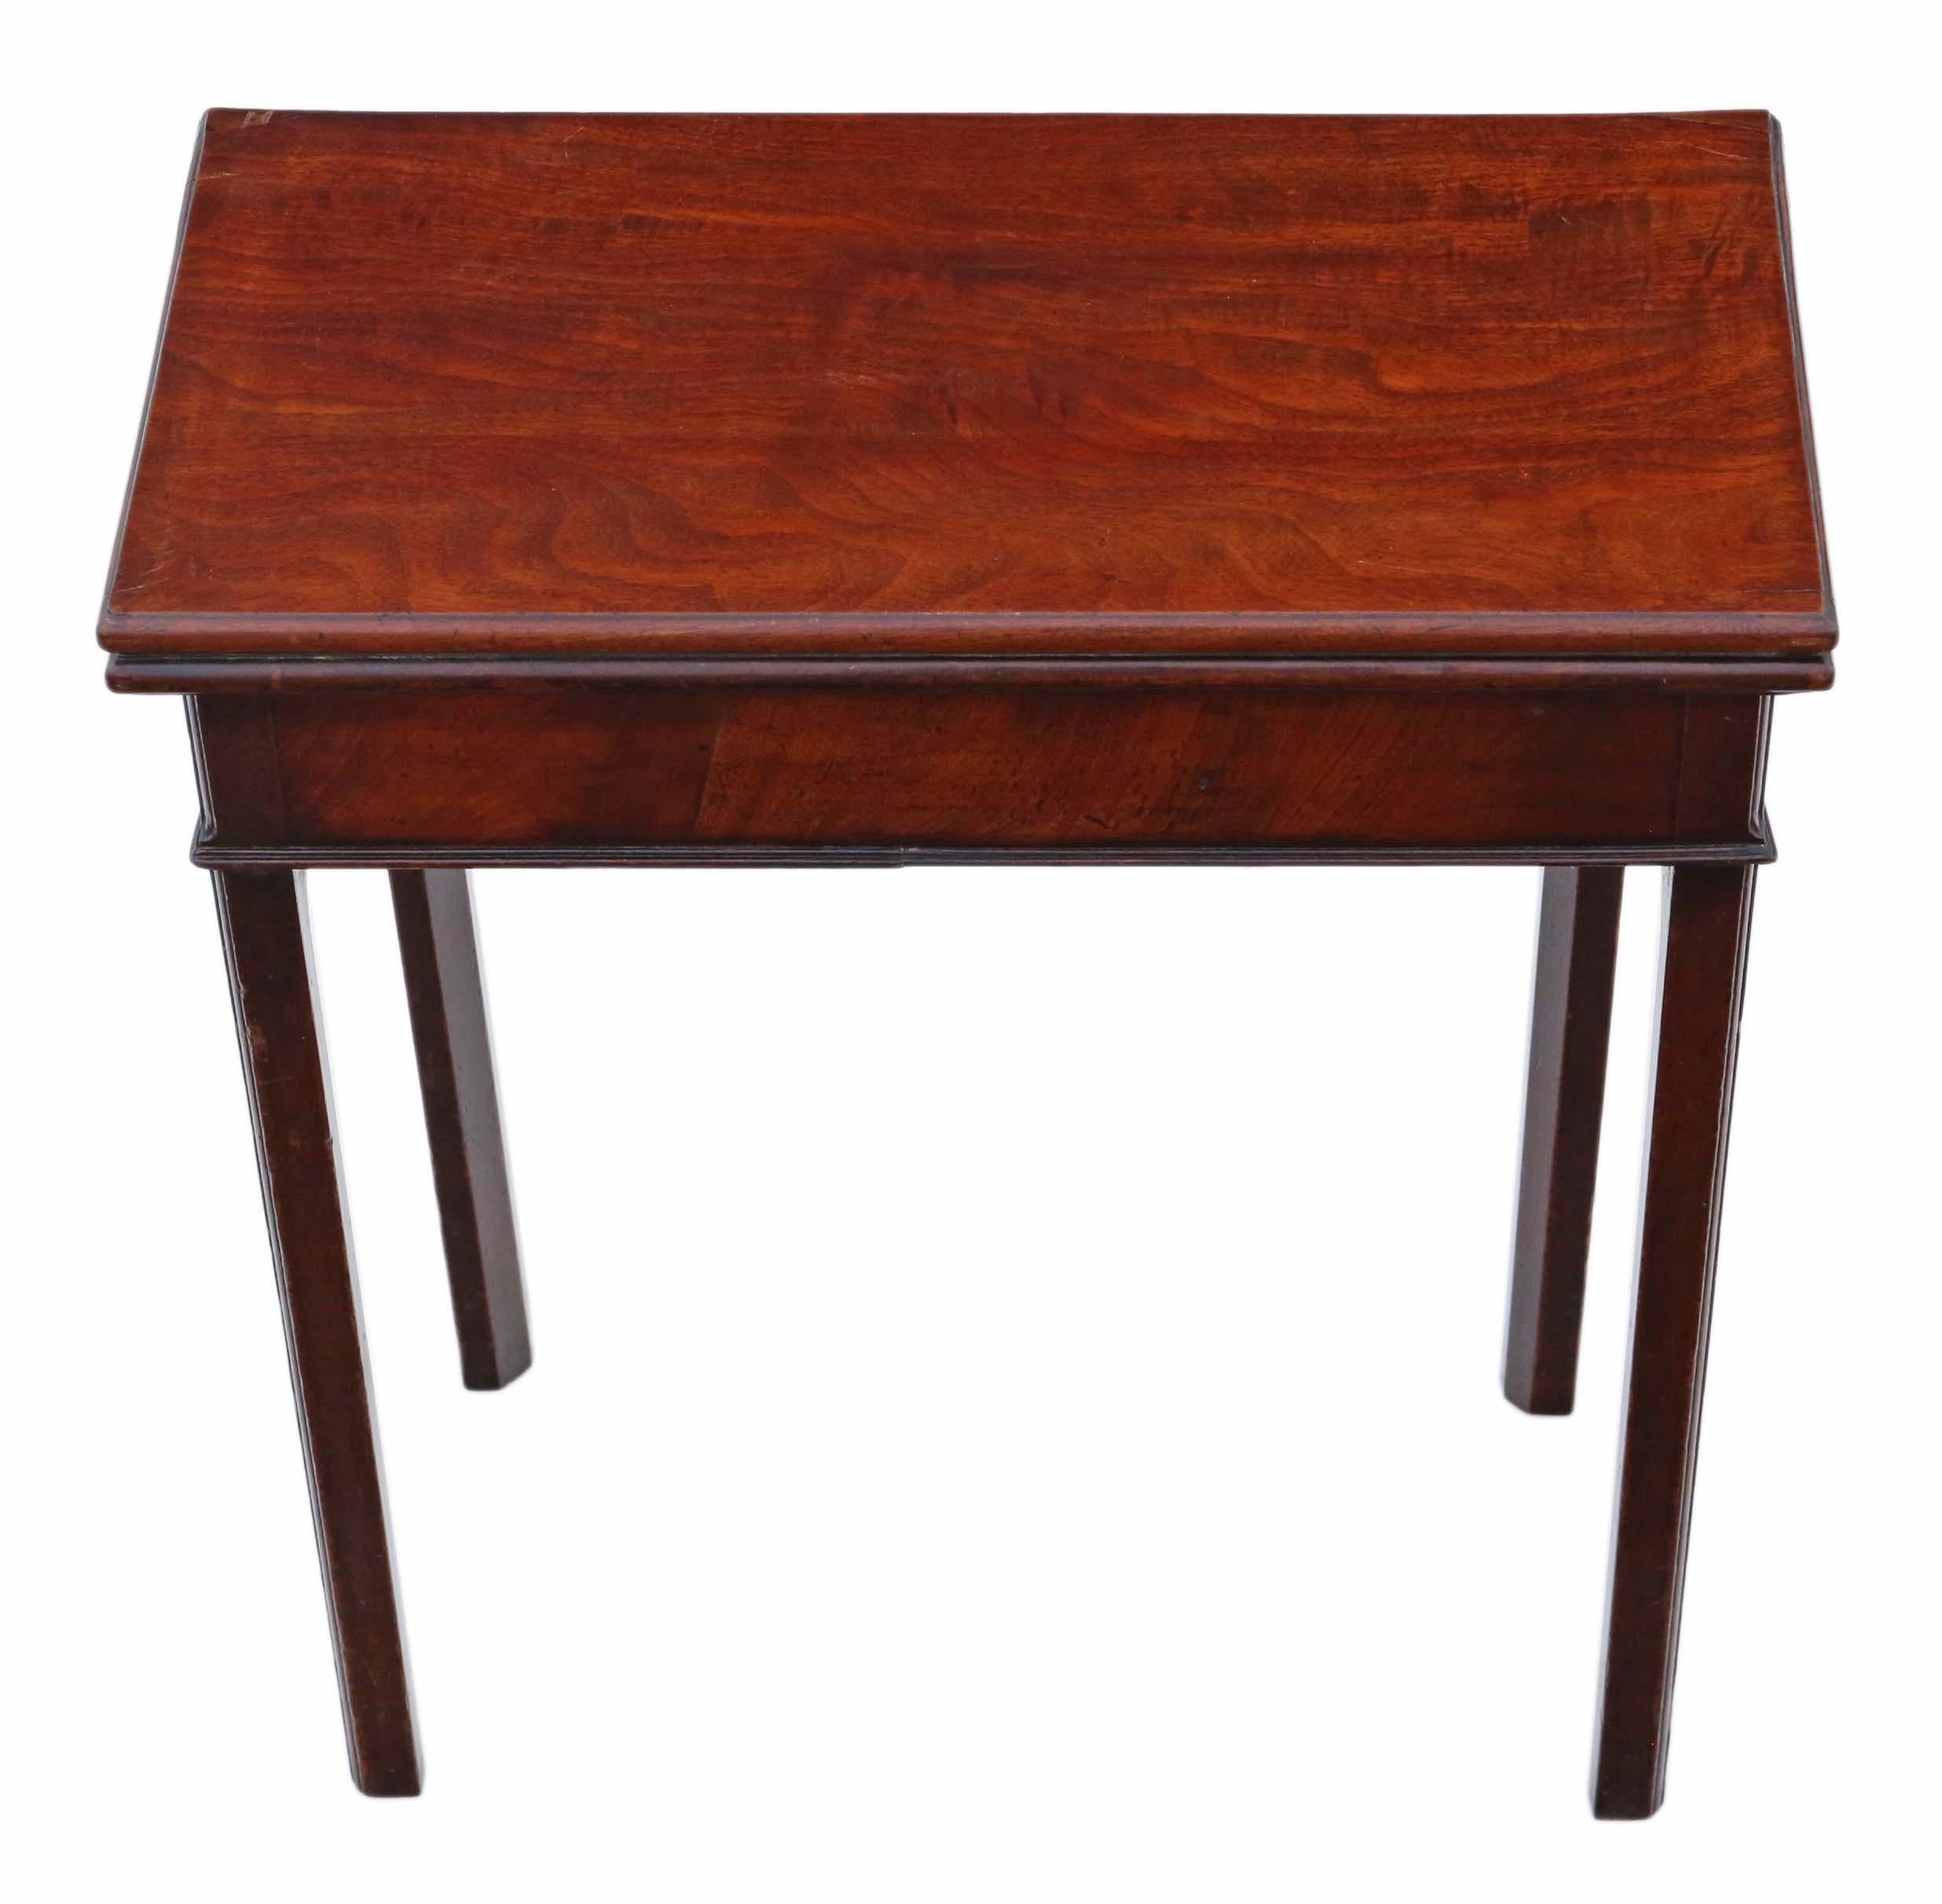 Antique quality Georgian 18th Century Cuban mahogany folding card tea console table. Lovely small compact dimensions.

No loose joints.

The table has a wonderful colour and patina.

Lovely age charm and character, would look amazing in the